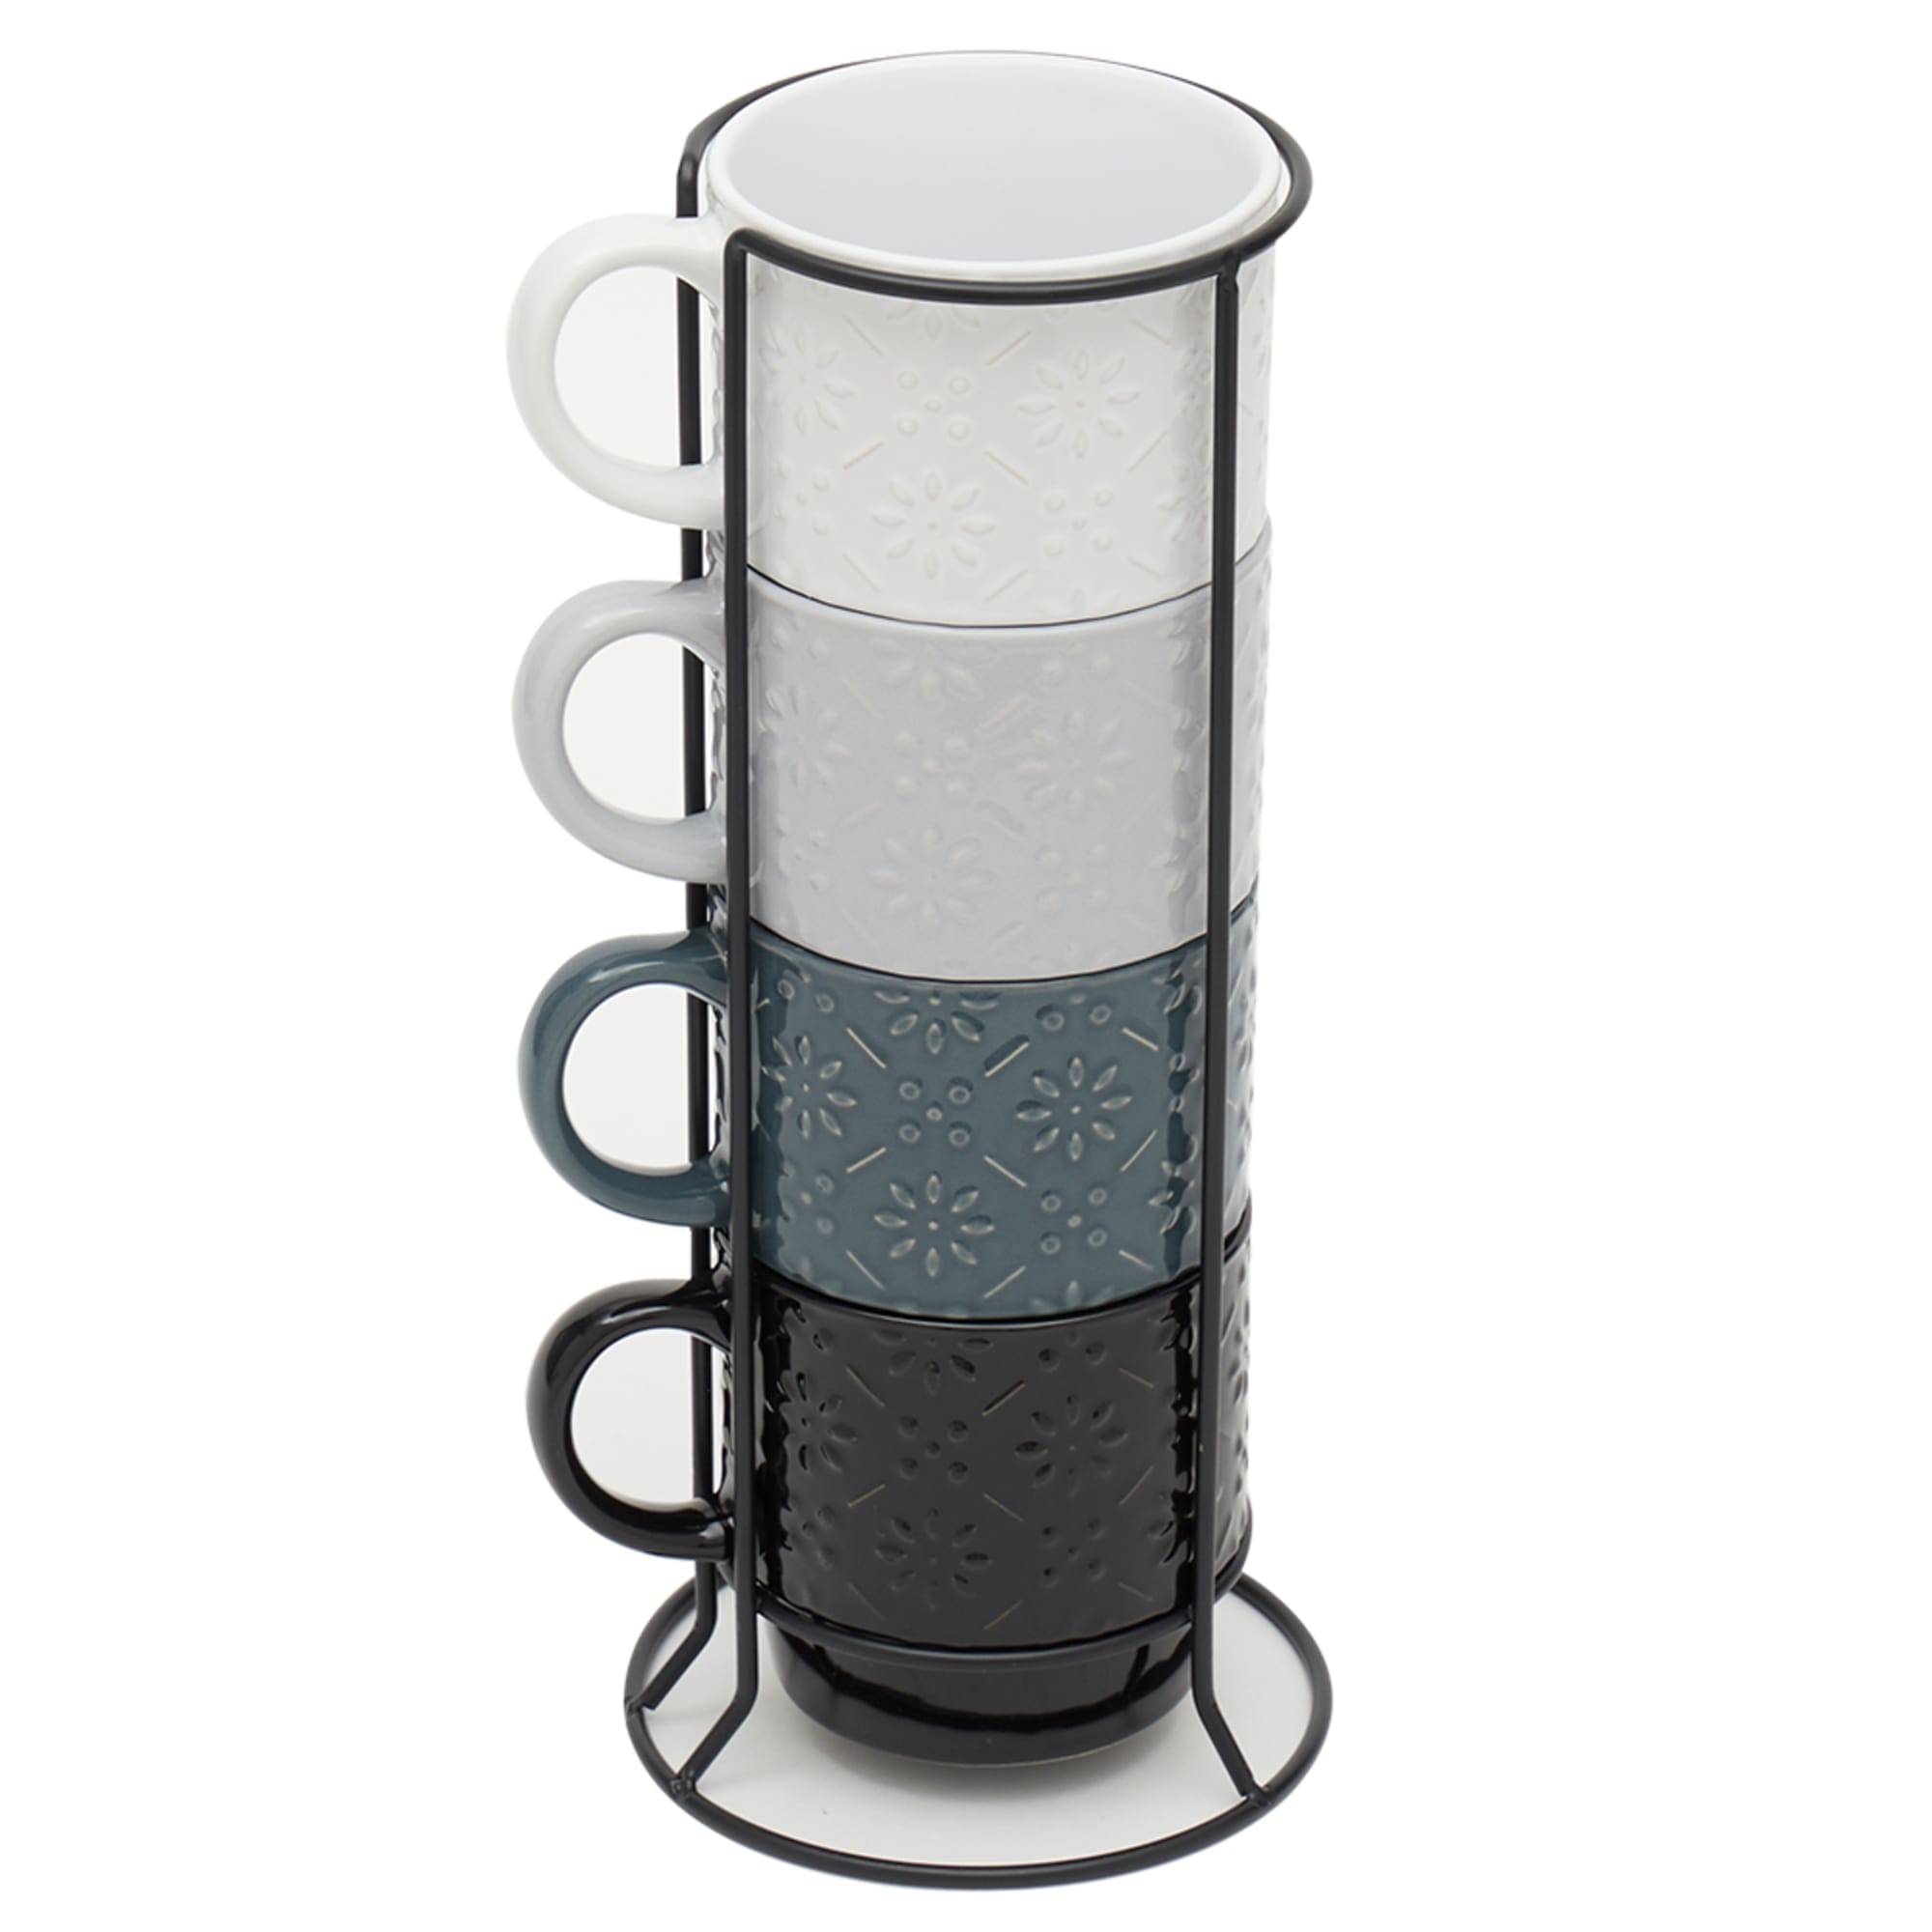 Home Basics Embossed Daisy 4 Piece Stackable Mug Set with Stand
 $10.00 EACH, CASE PACK OF 6